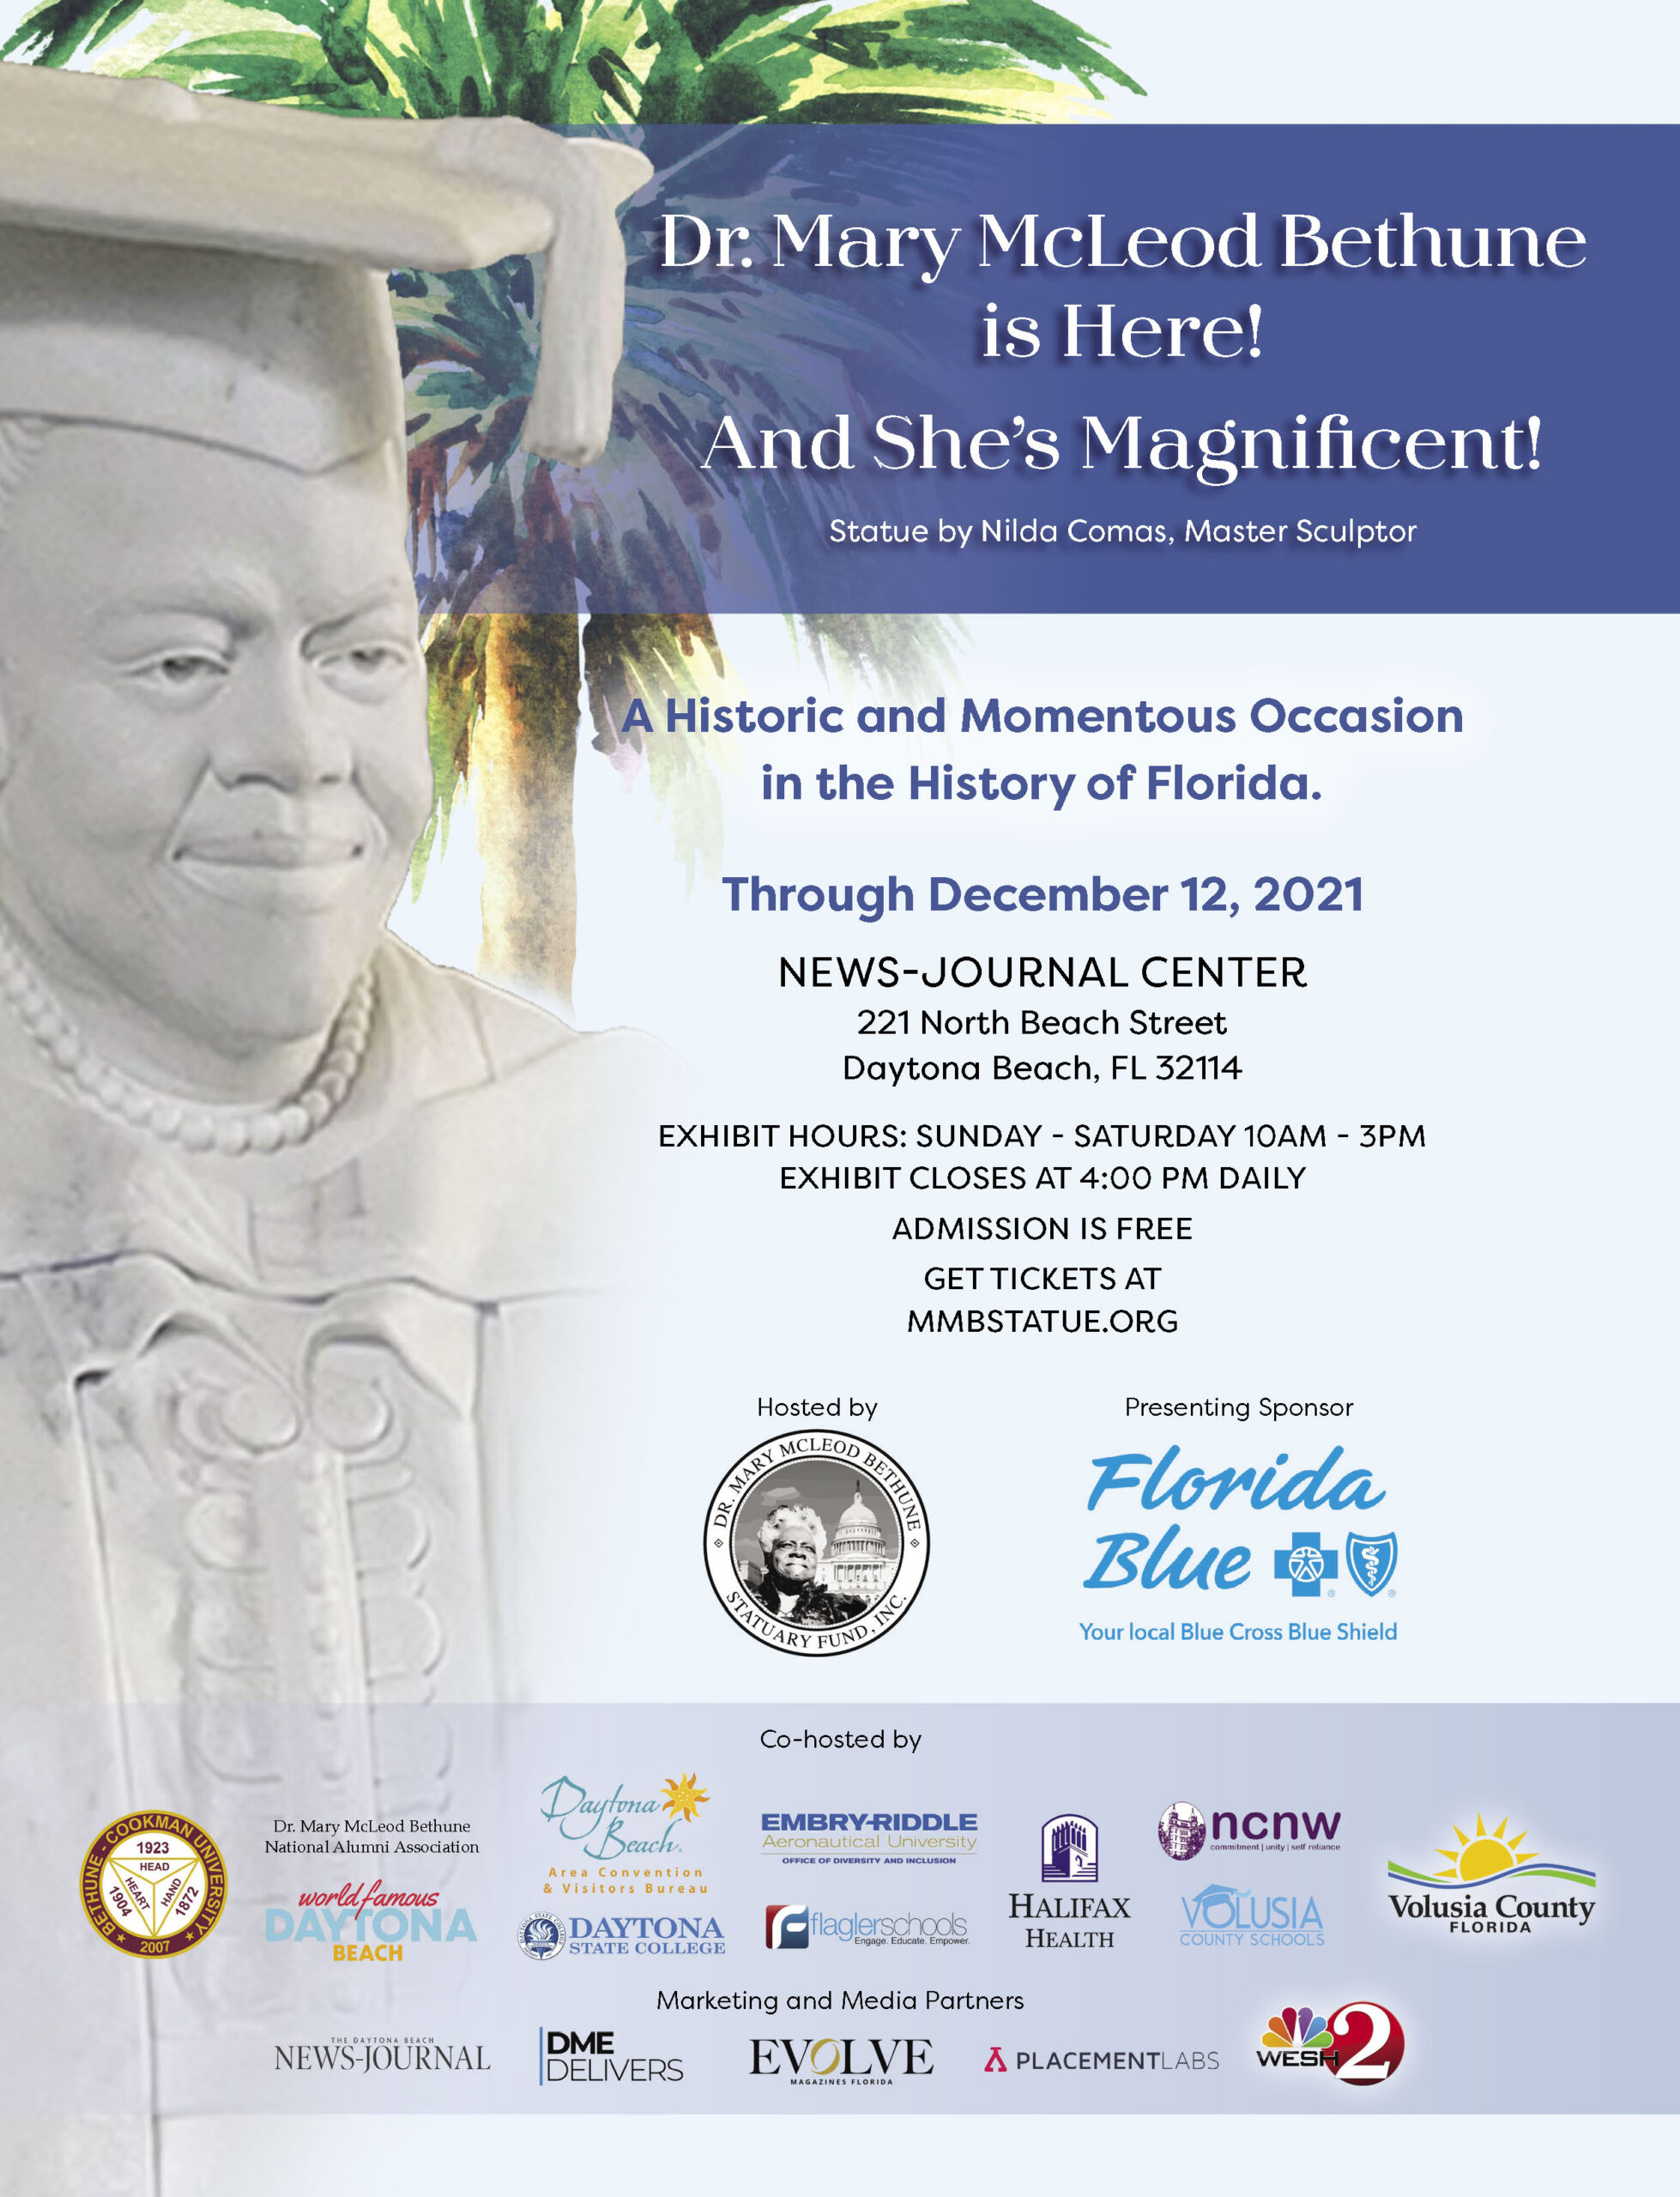 Historic Display of Dr. Mary McLeod Bethune Statue in Florida Prior to US Capitol Placement